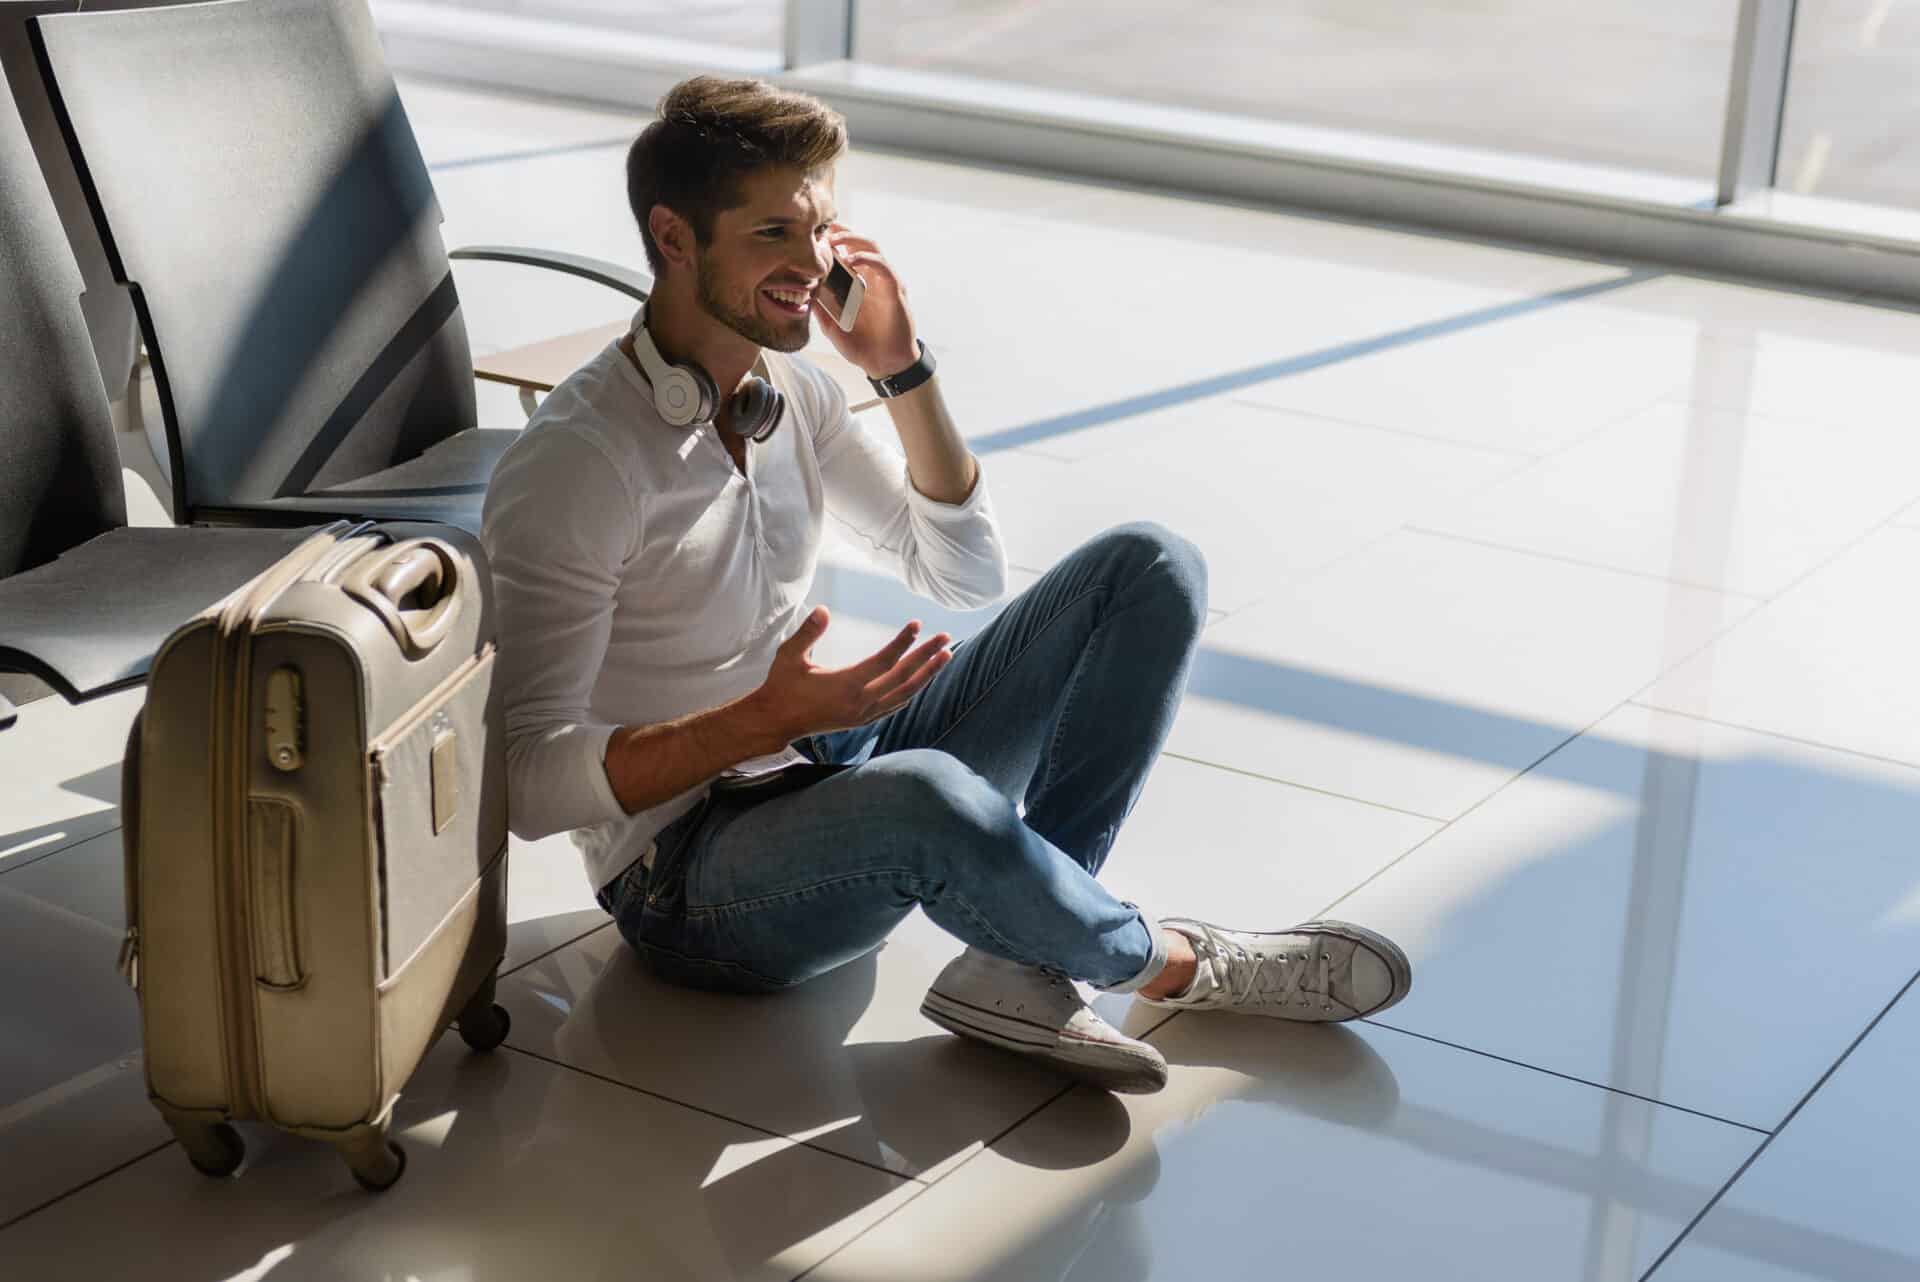 Man sitting on airport floor talking on the phone during a long layover